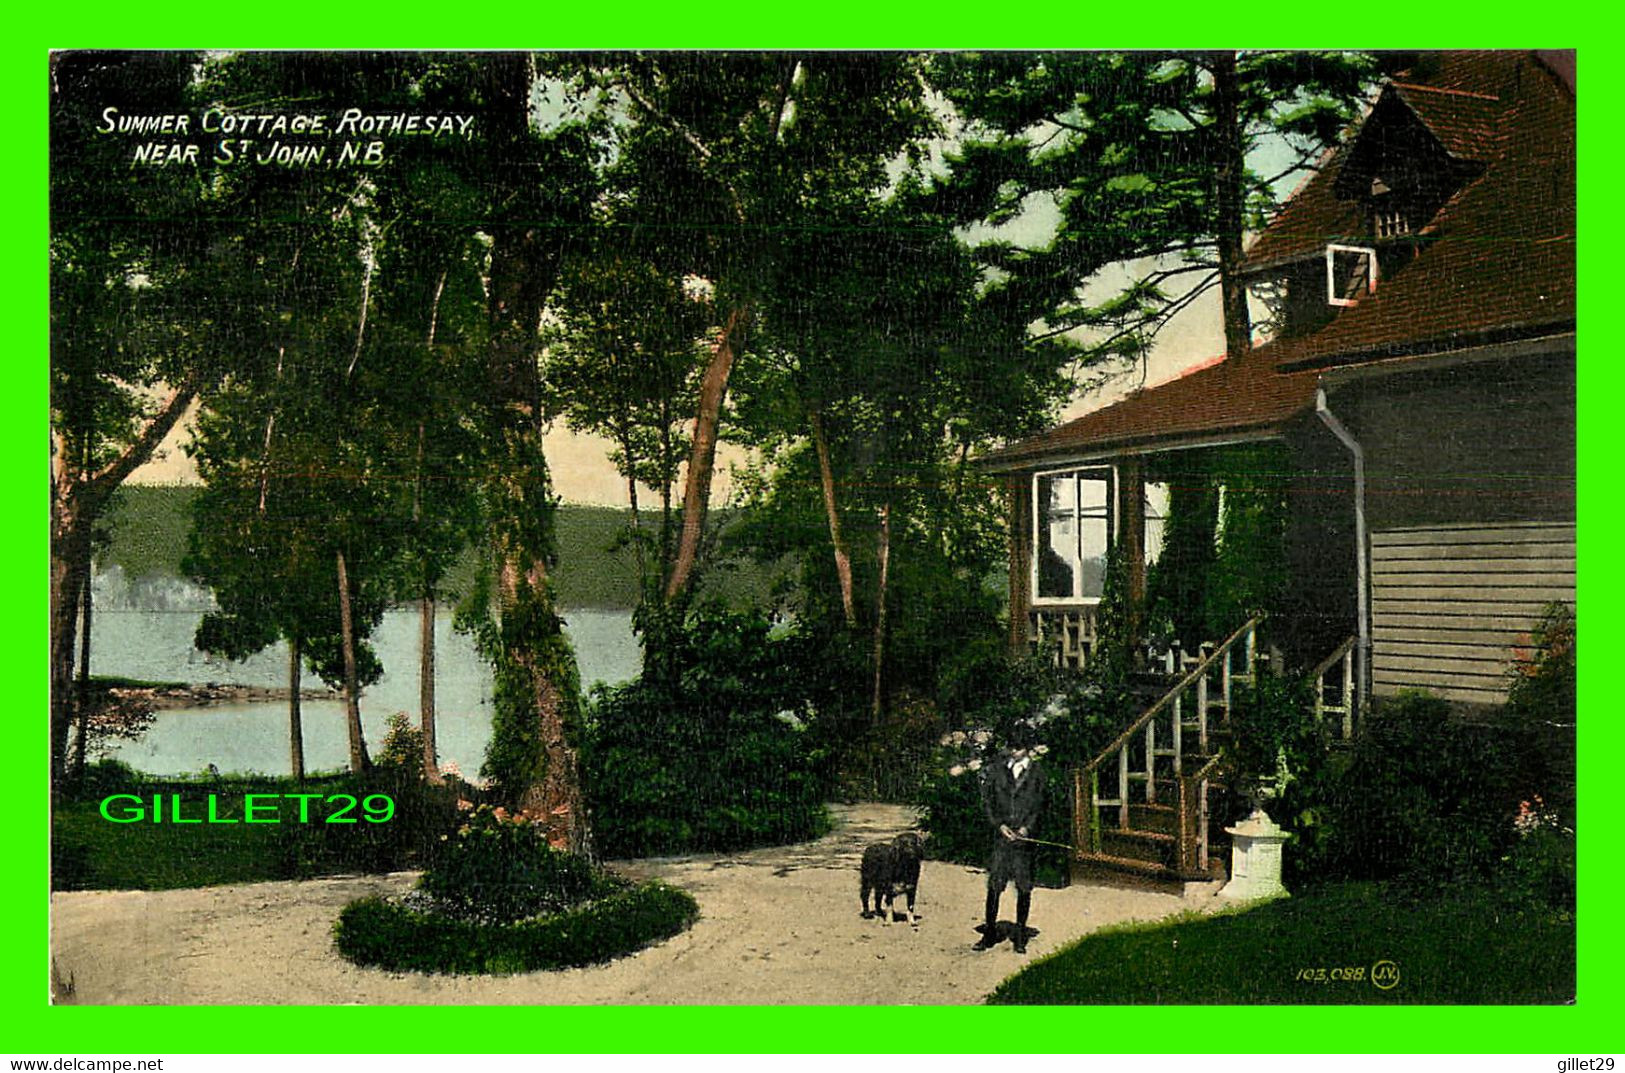 ROTHESAY, NEW BRUNSWICK - SUMMER COTTAGE - ANIMATED - TRAVEL IN 1909 - THE VALENTINE & SONS PUB. - - St. John